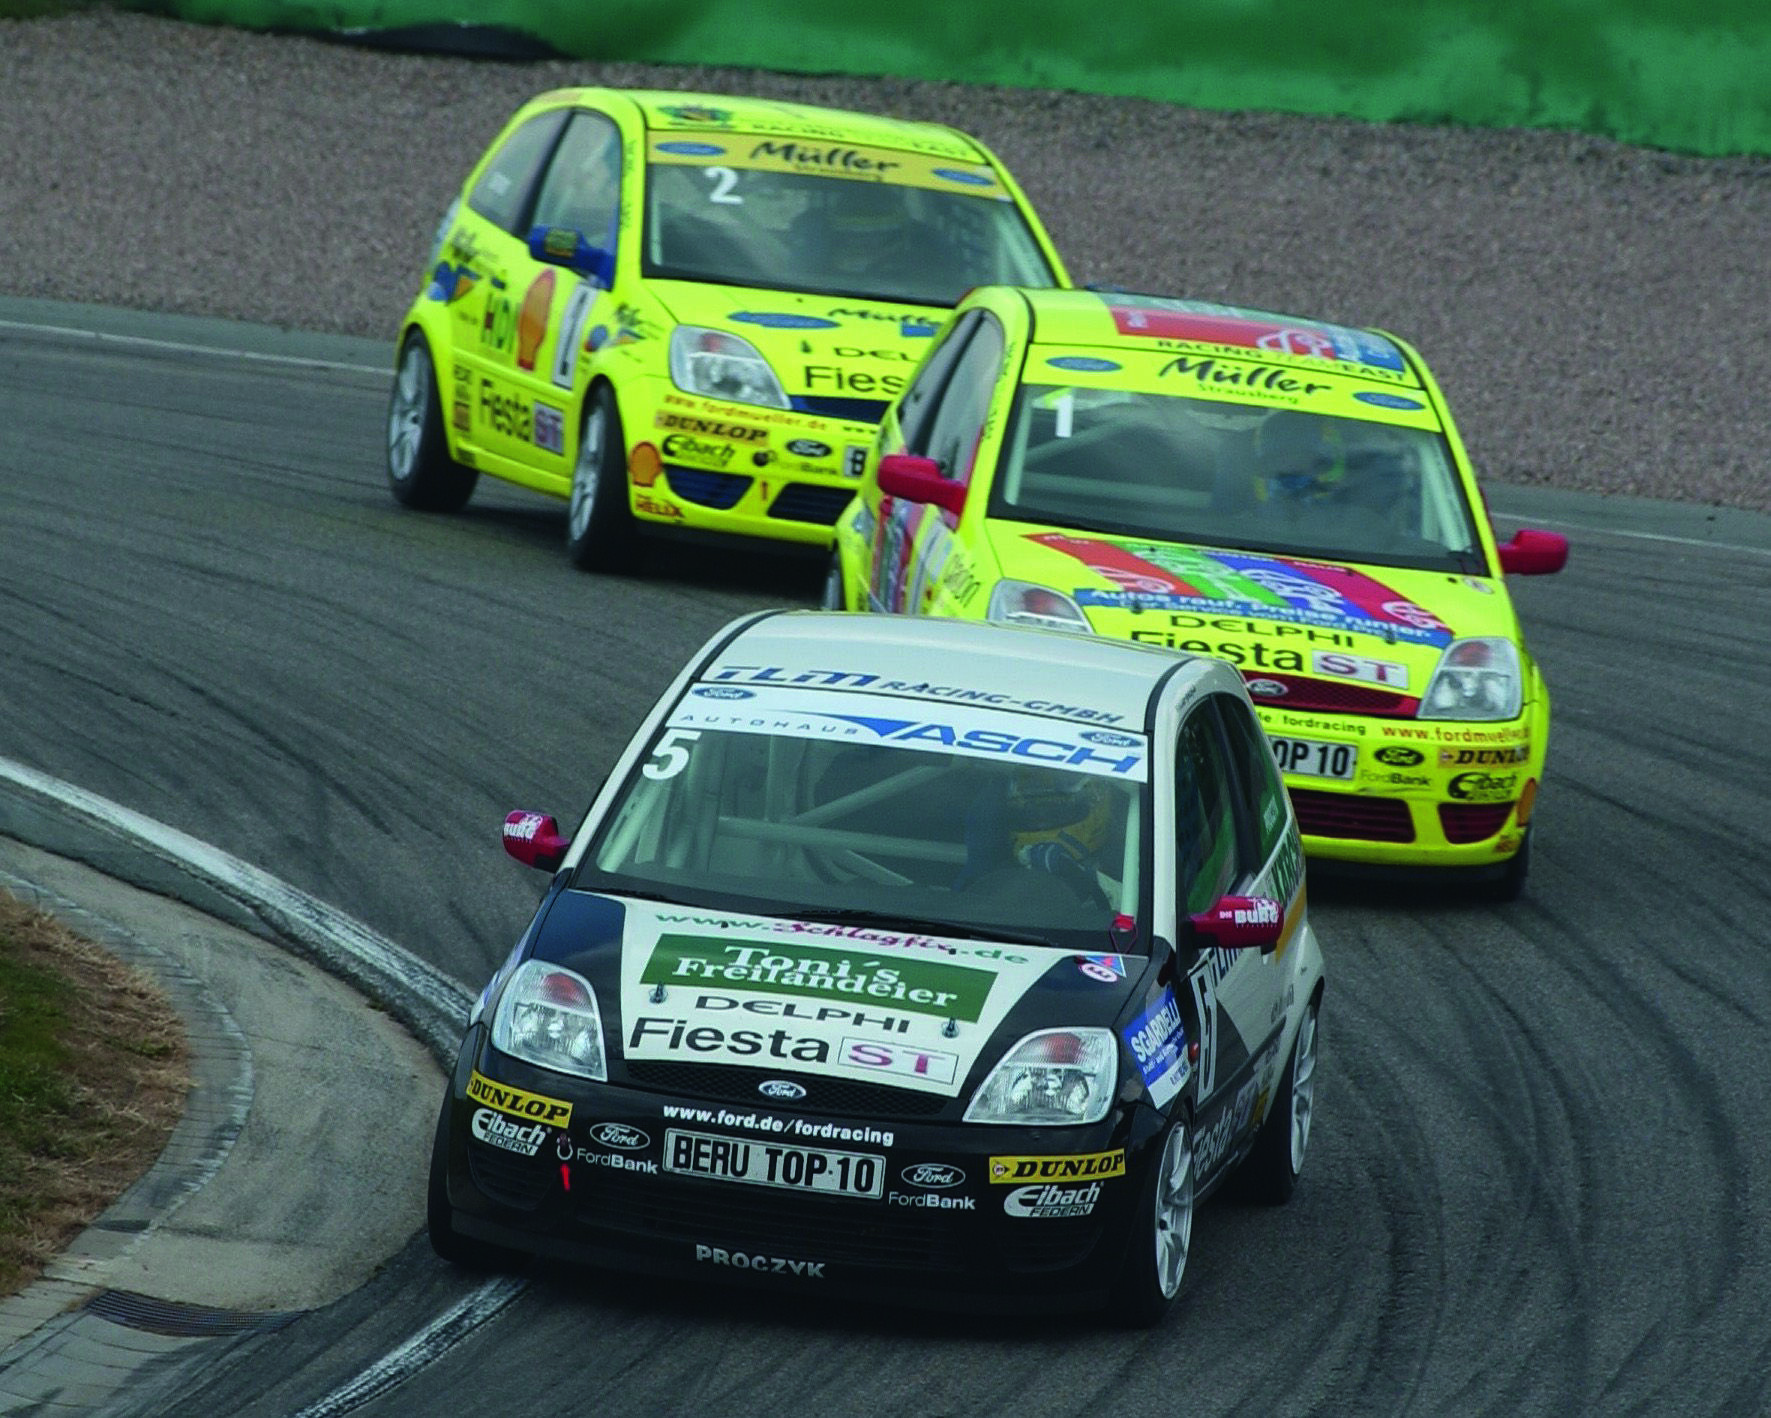 The 2004 Fiesta ST Cup